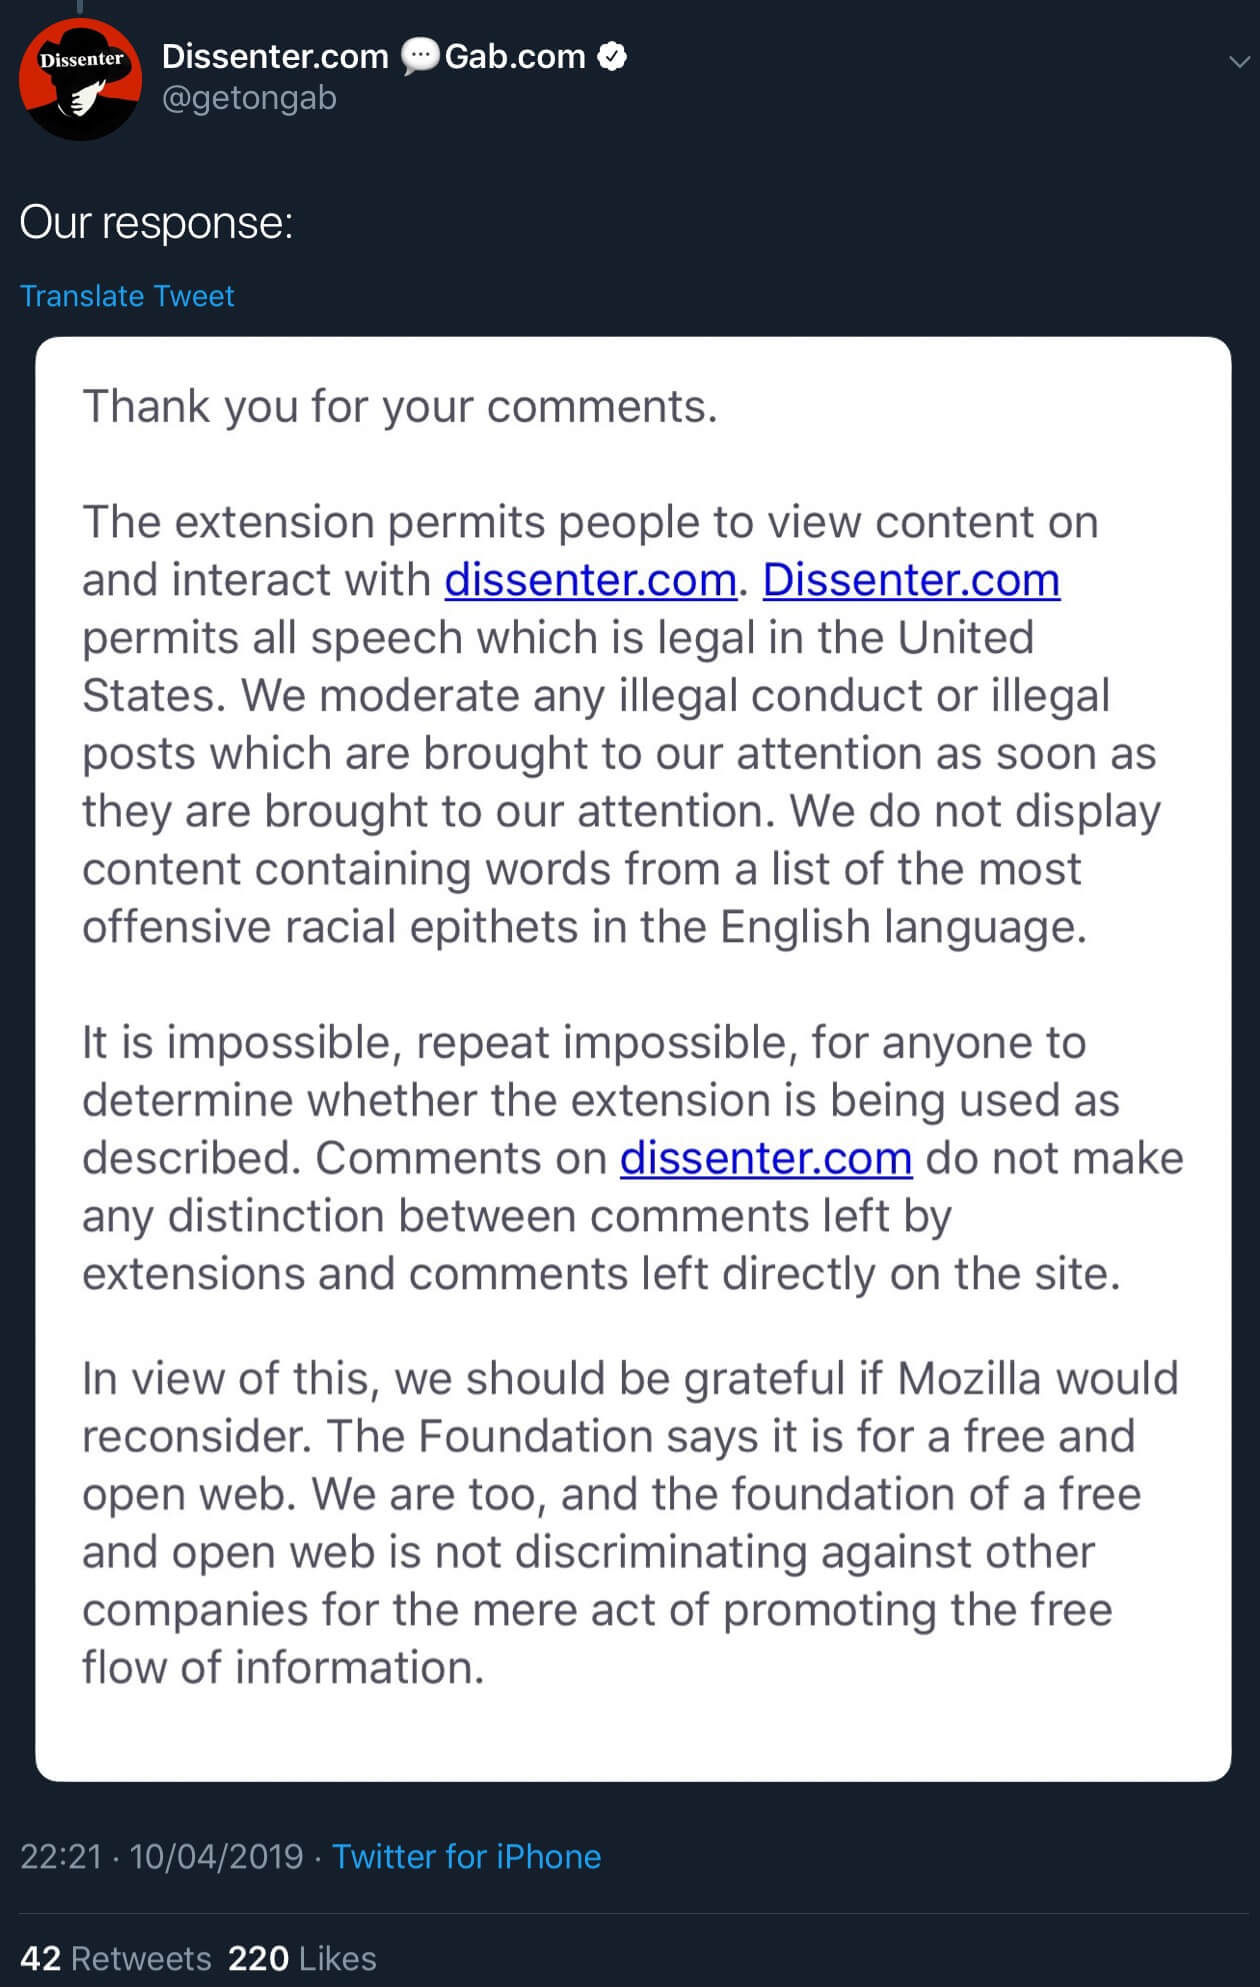 Dissenter's email replying to Mozilla and asking it to reconsider the ban.